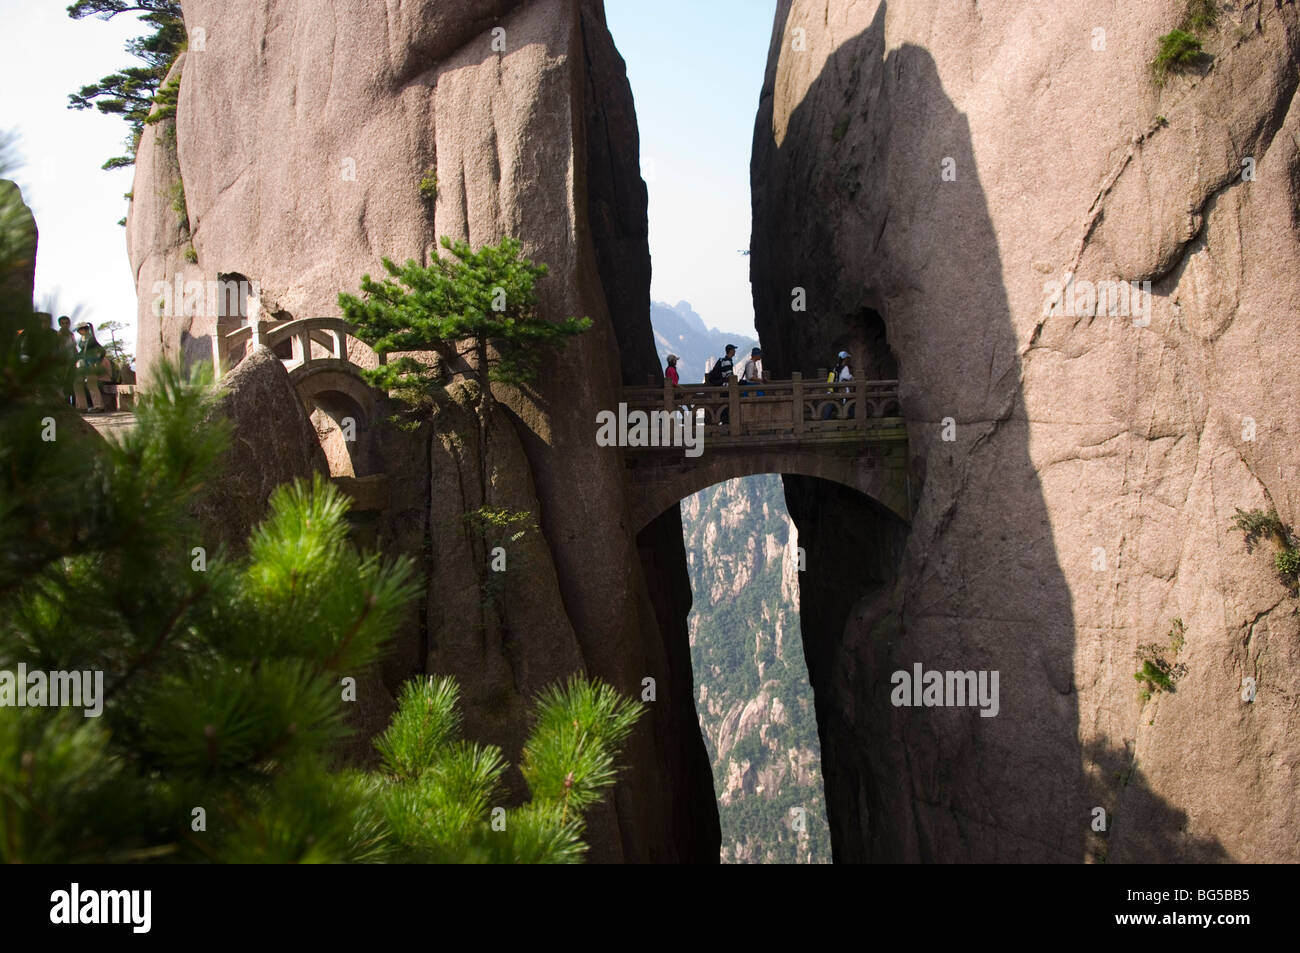 Buxian bridge connecting two granite peaks of Huang Shan,  Anhui province. China Stock Photo